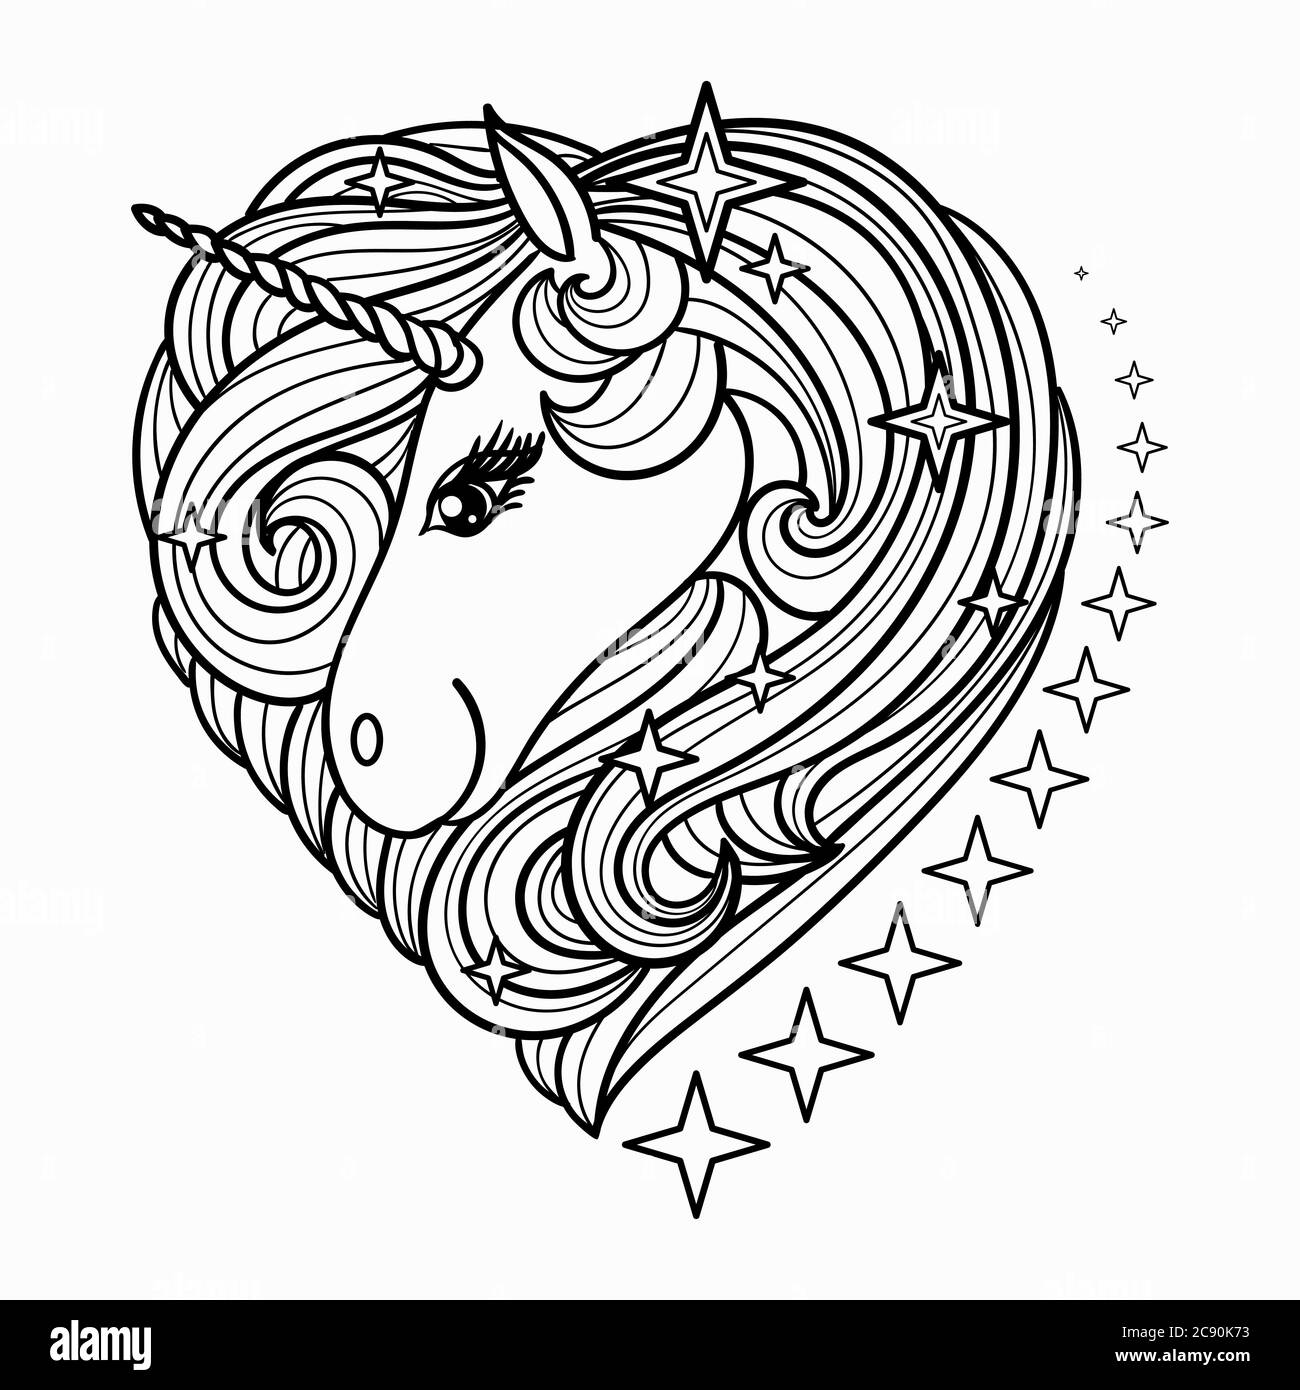 Cute Unicorn head with a long mane. Stylized in the shape of a heart. Black and white vector illustration for coloring, prints, tattoo. Stock Vector